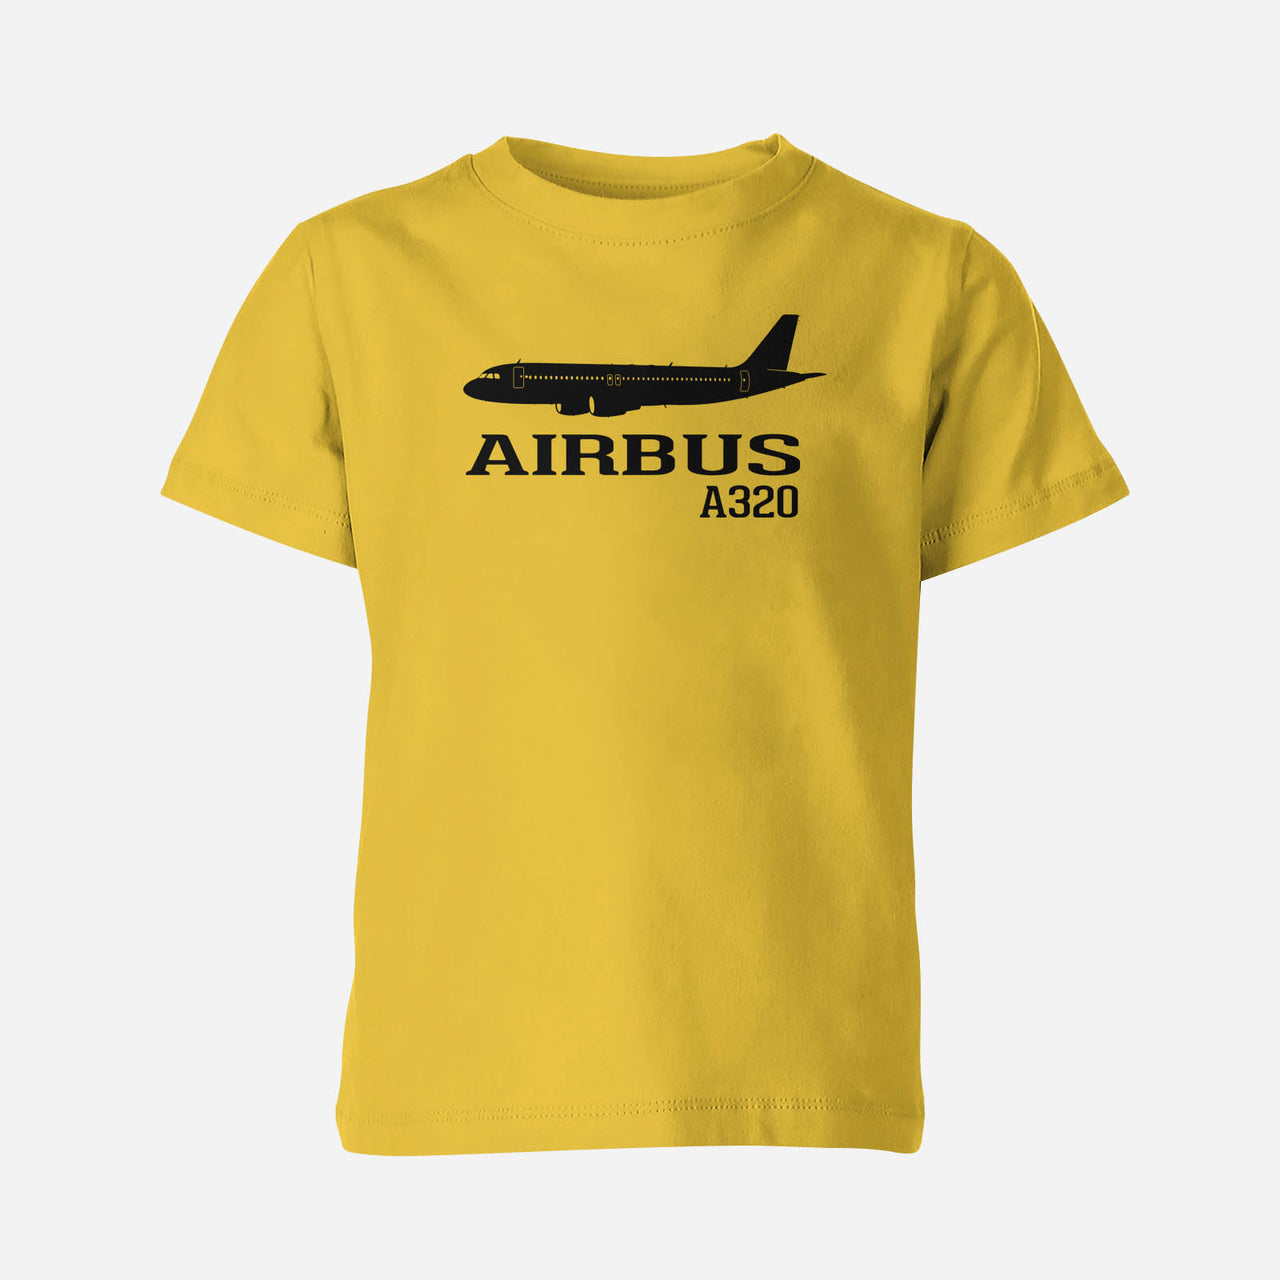 Airbus A320 Printed & Designed Children T-Shirts